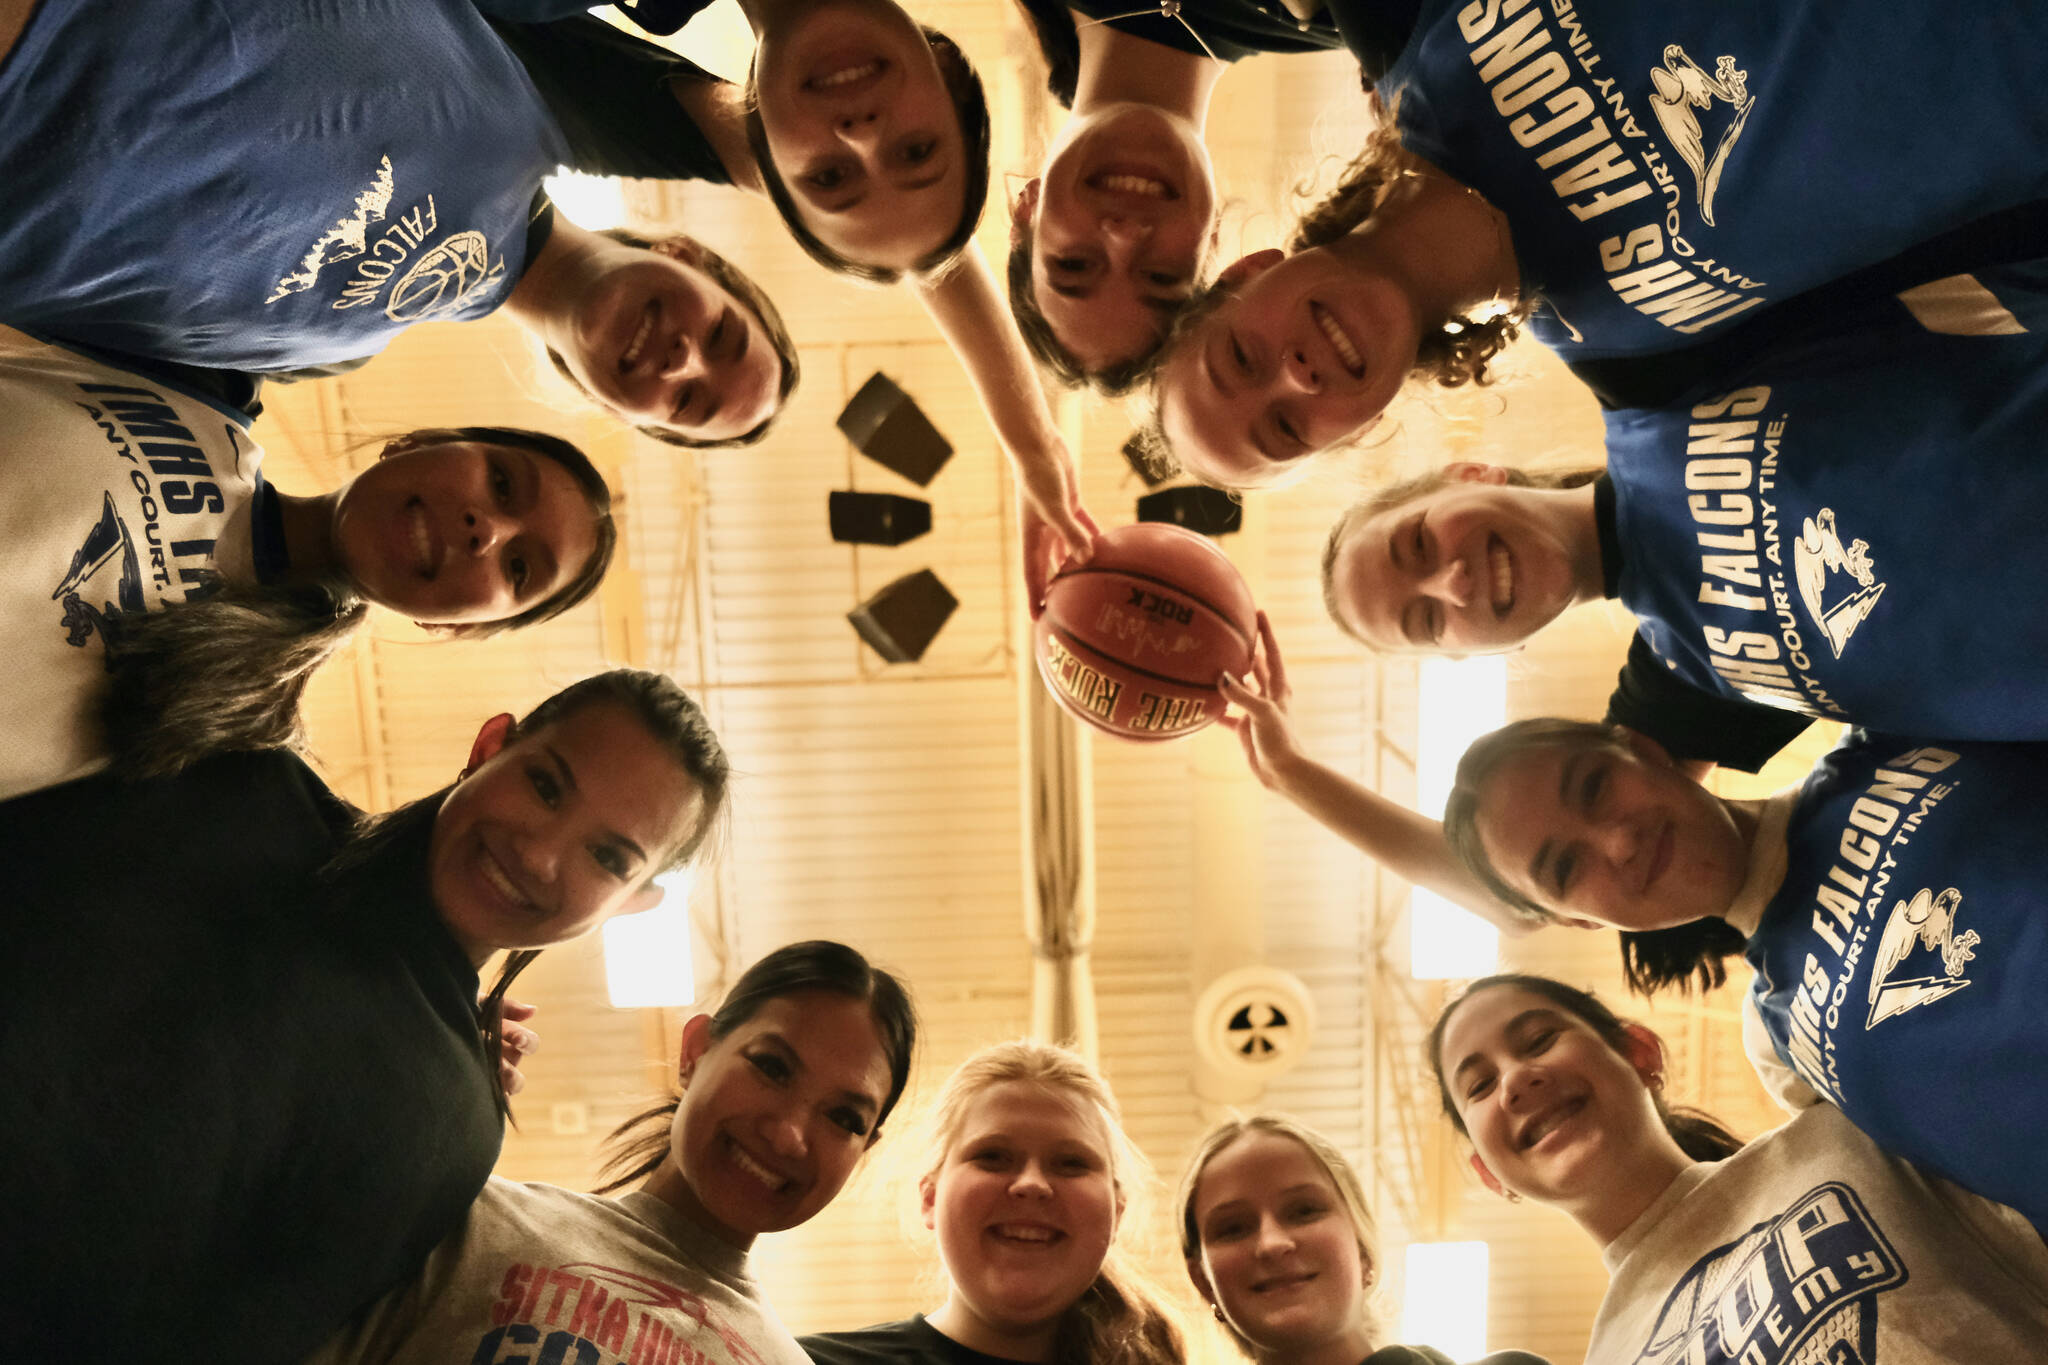 The Thunder Mountain High School Falcons Region V champion girls basketball team pose for a photo during practice at the Thunderdome on Friday. The Falcons begin state tournament play Wednesday at Anchorage’s Alaska Airlines Center. (Klas Stolpe / For the Juneau Empire)